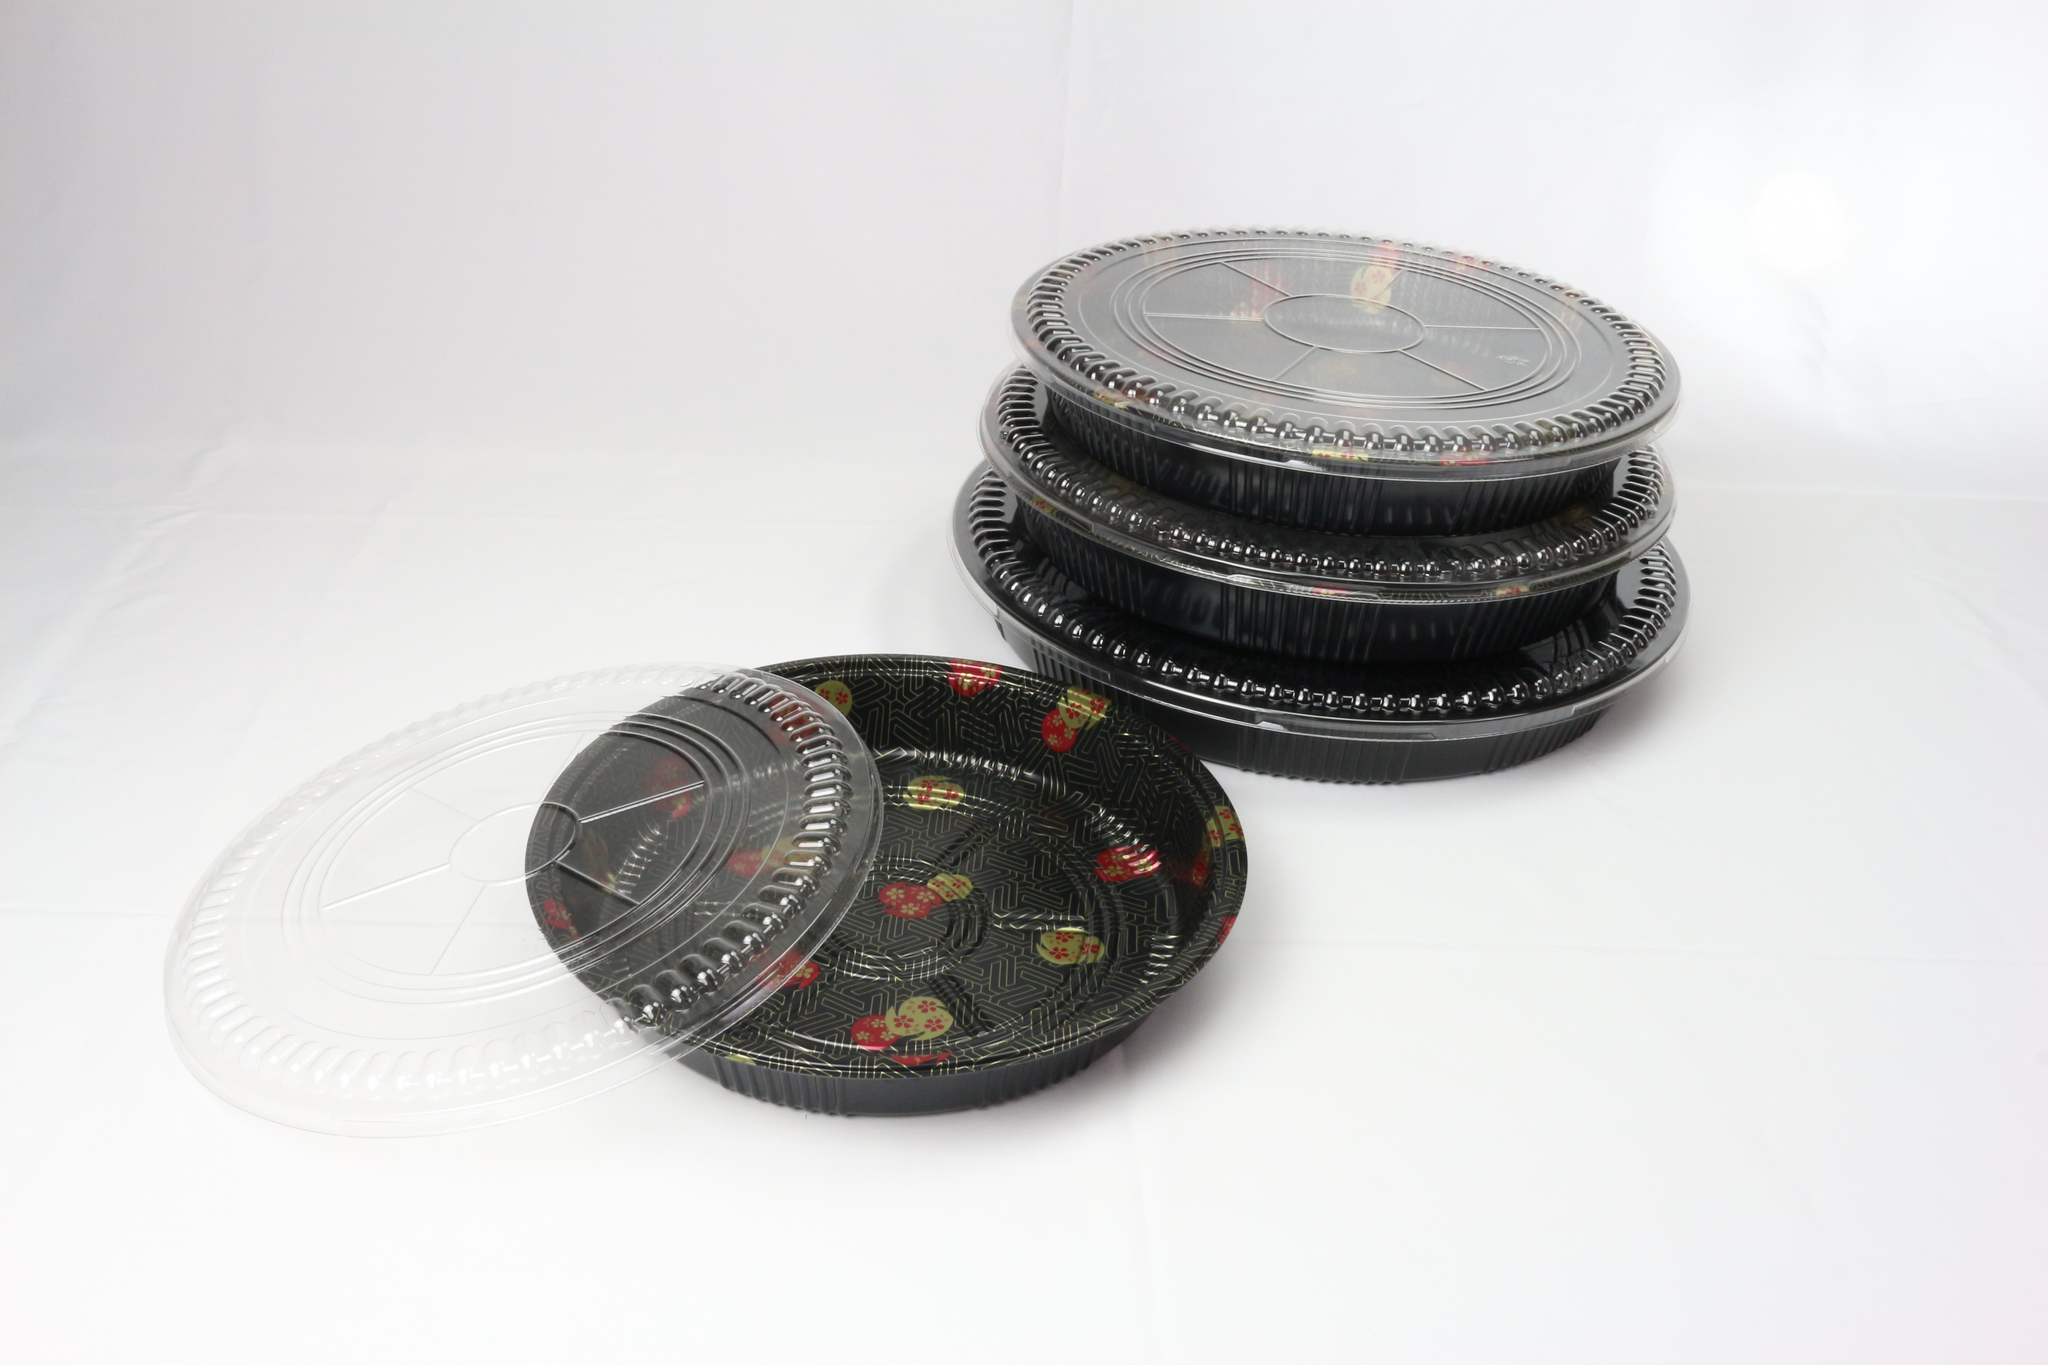 Disposable Serving Round Trays Party Platter with Clear Lids 11.5 – ST  International Supply Incorporated